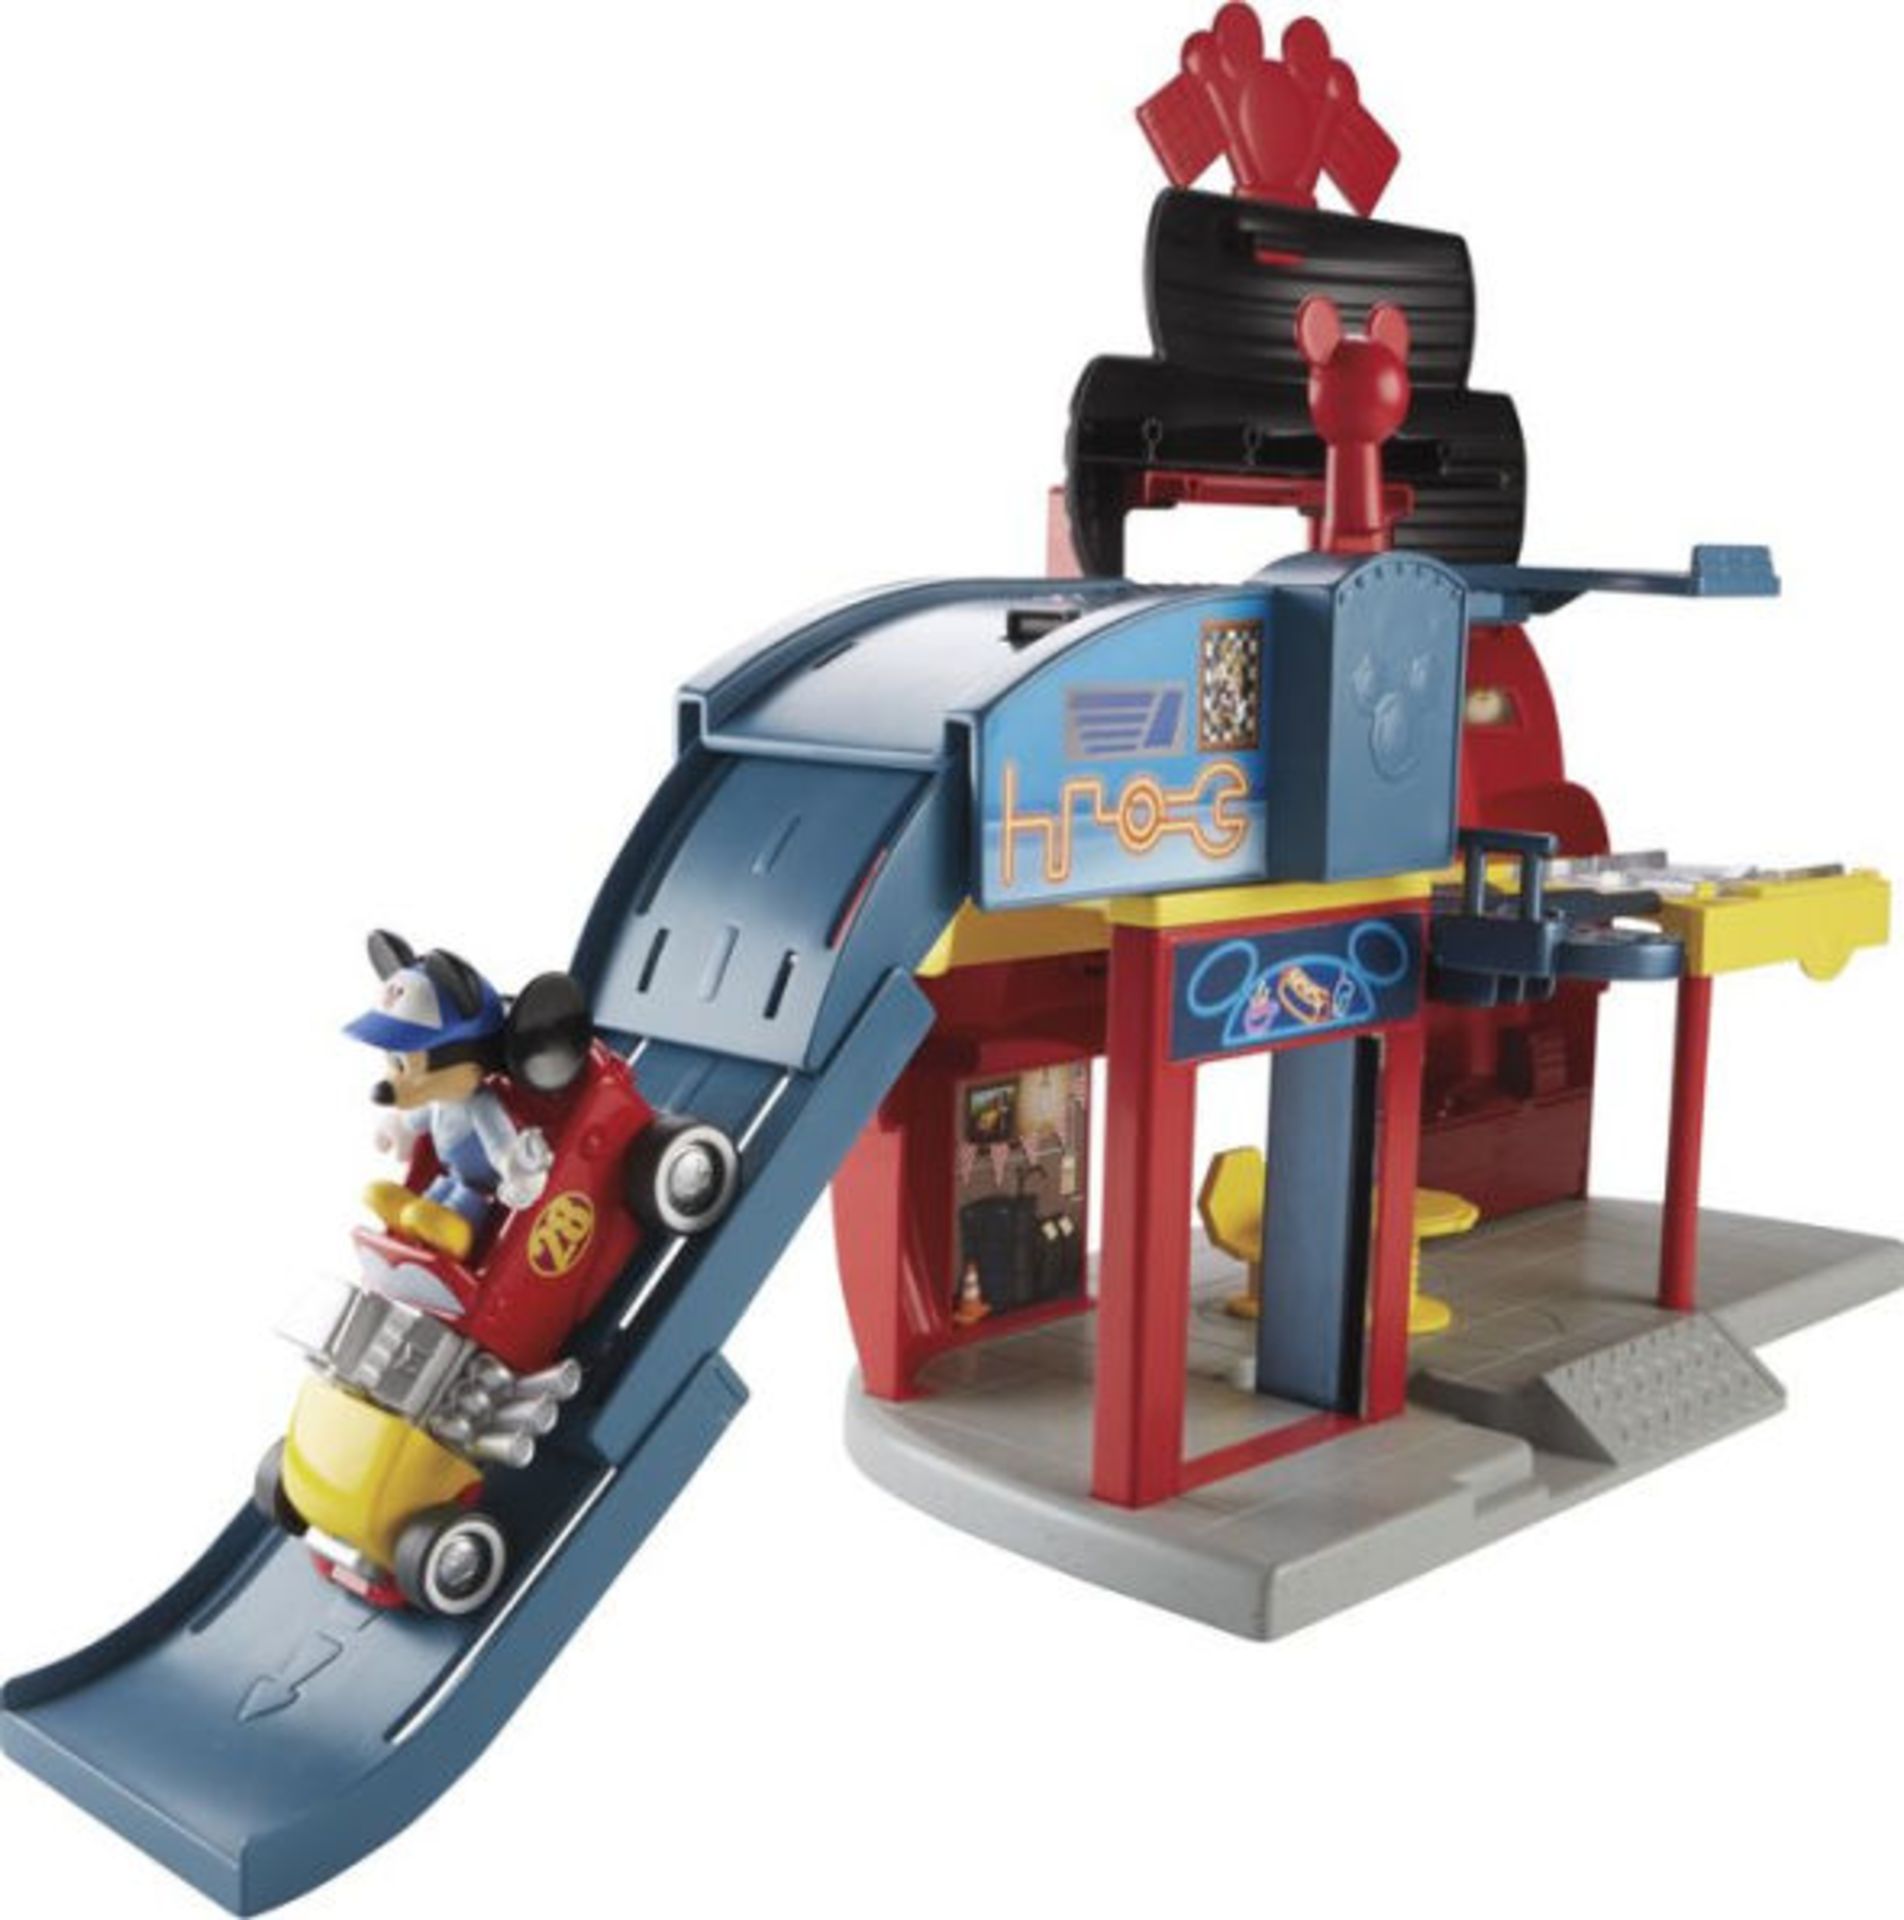 V Brand New Disney Mickey and the Roadster Racers Garage - 3 Levels of Play - Rotating Car Lift - - Image 2 of 2